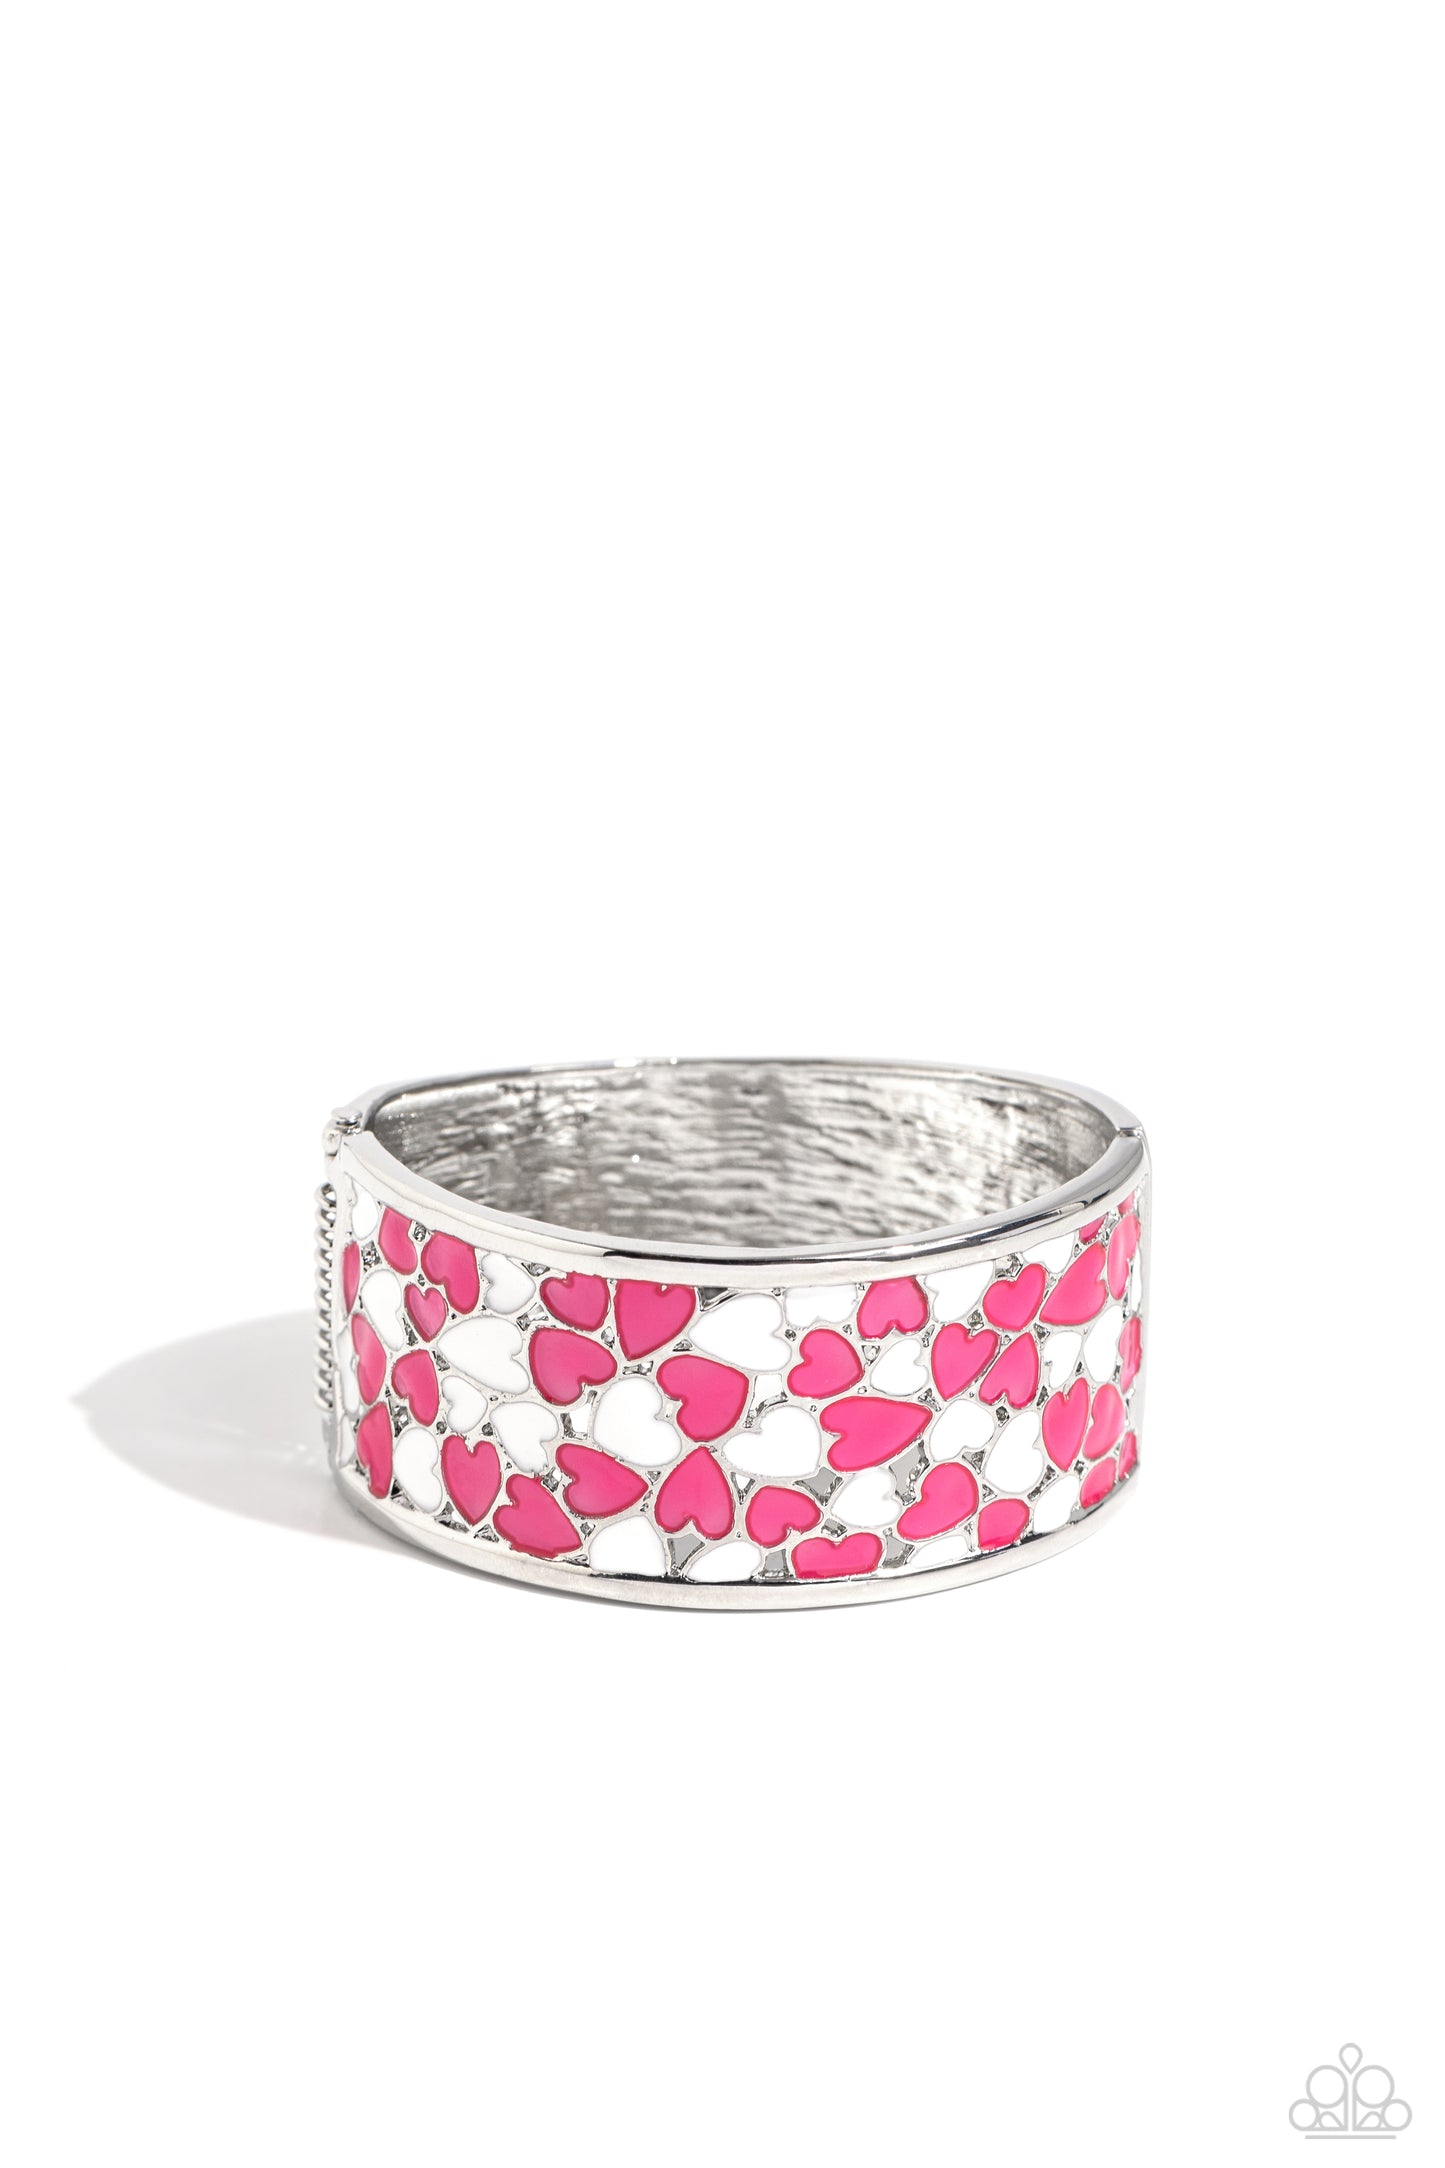 Penchant for Patterns - Pink & White Hearts/Wide Silver Band Paparazzi Hinge Bracelet